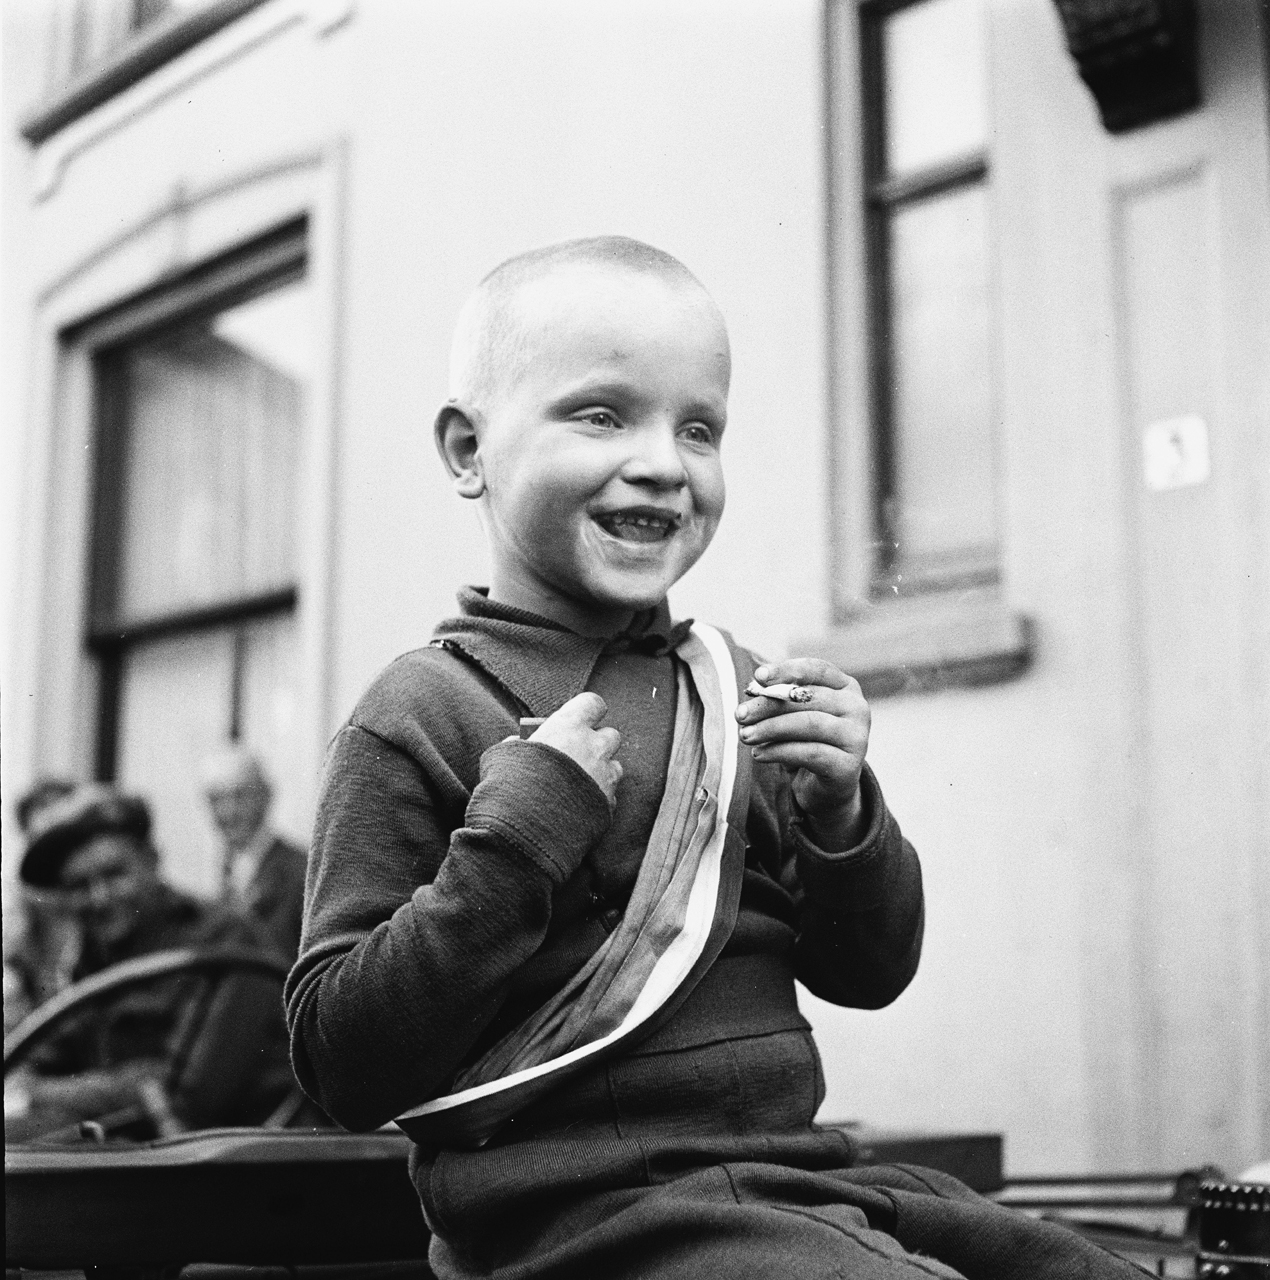 A young boy celebrates the liberation of the Netherlands by Allied Forces with a cigarette, 1945